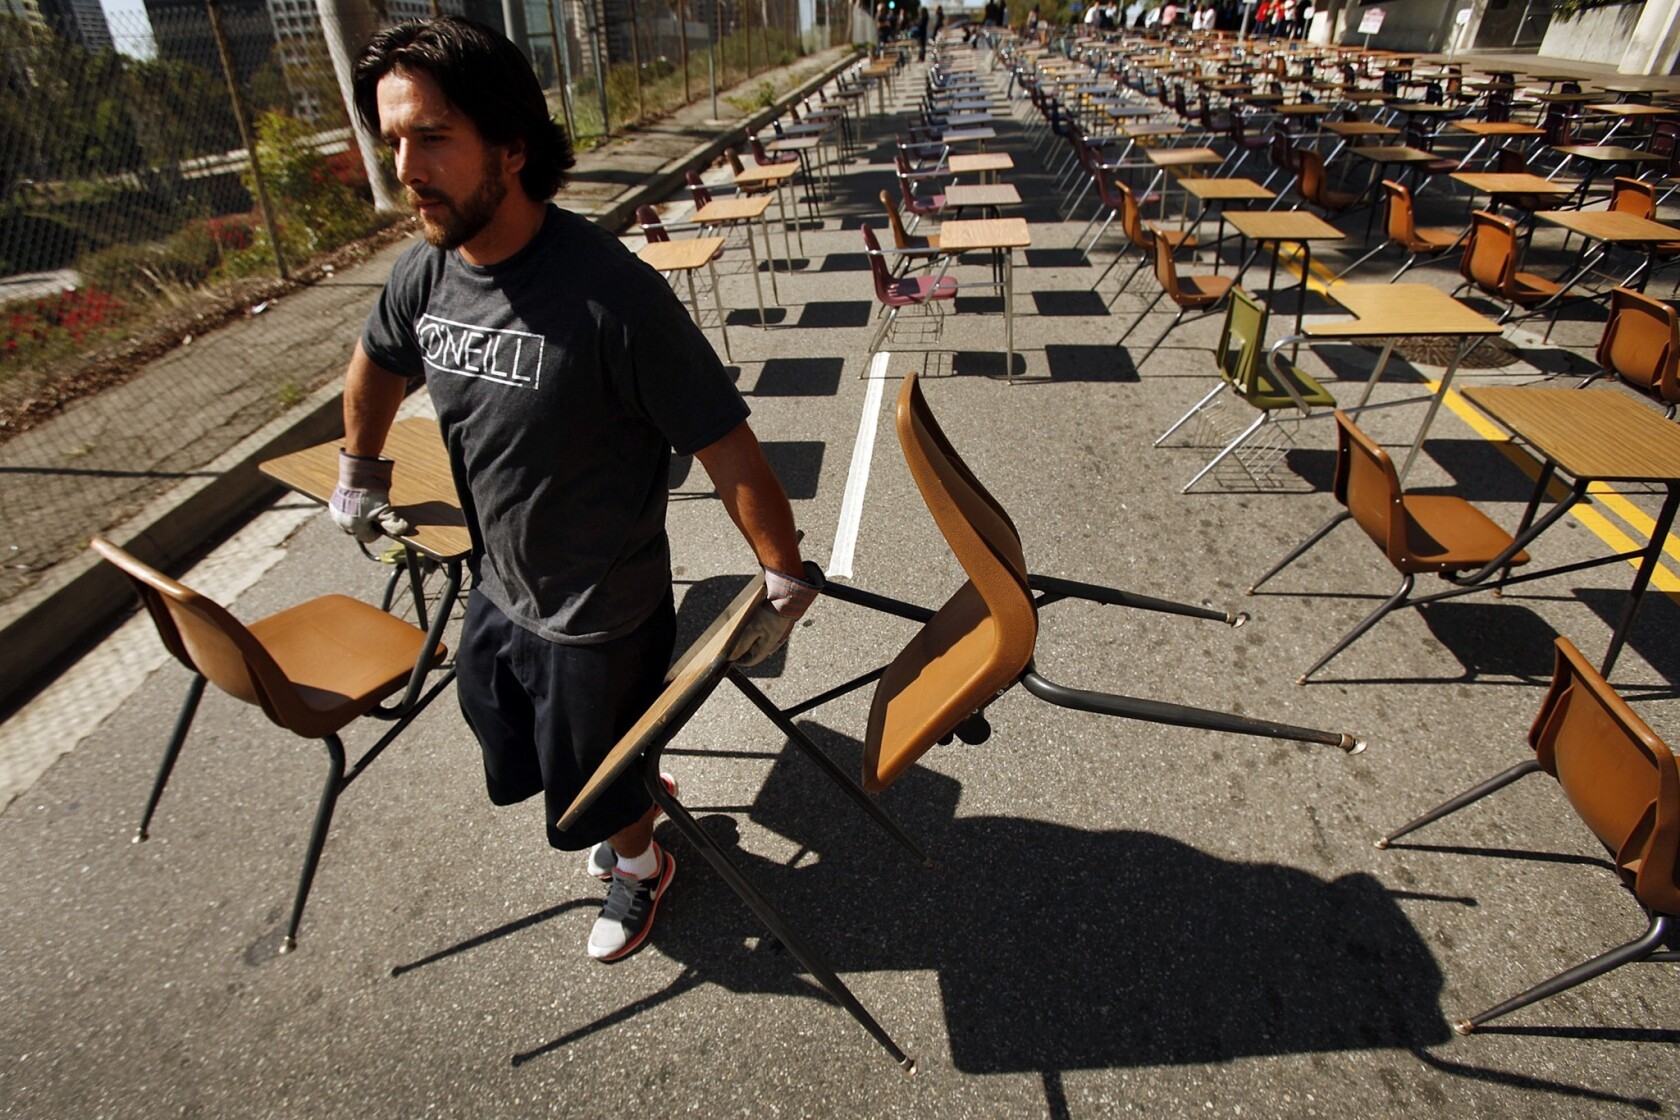 375 Desks Block Traffic Outside Lausd Office In Dropout Rate